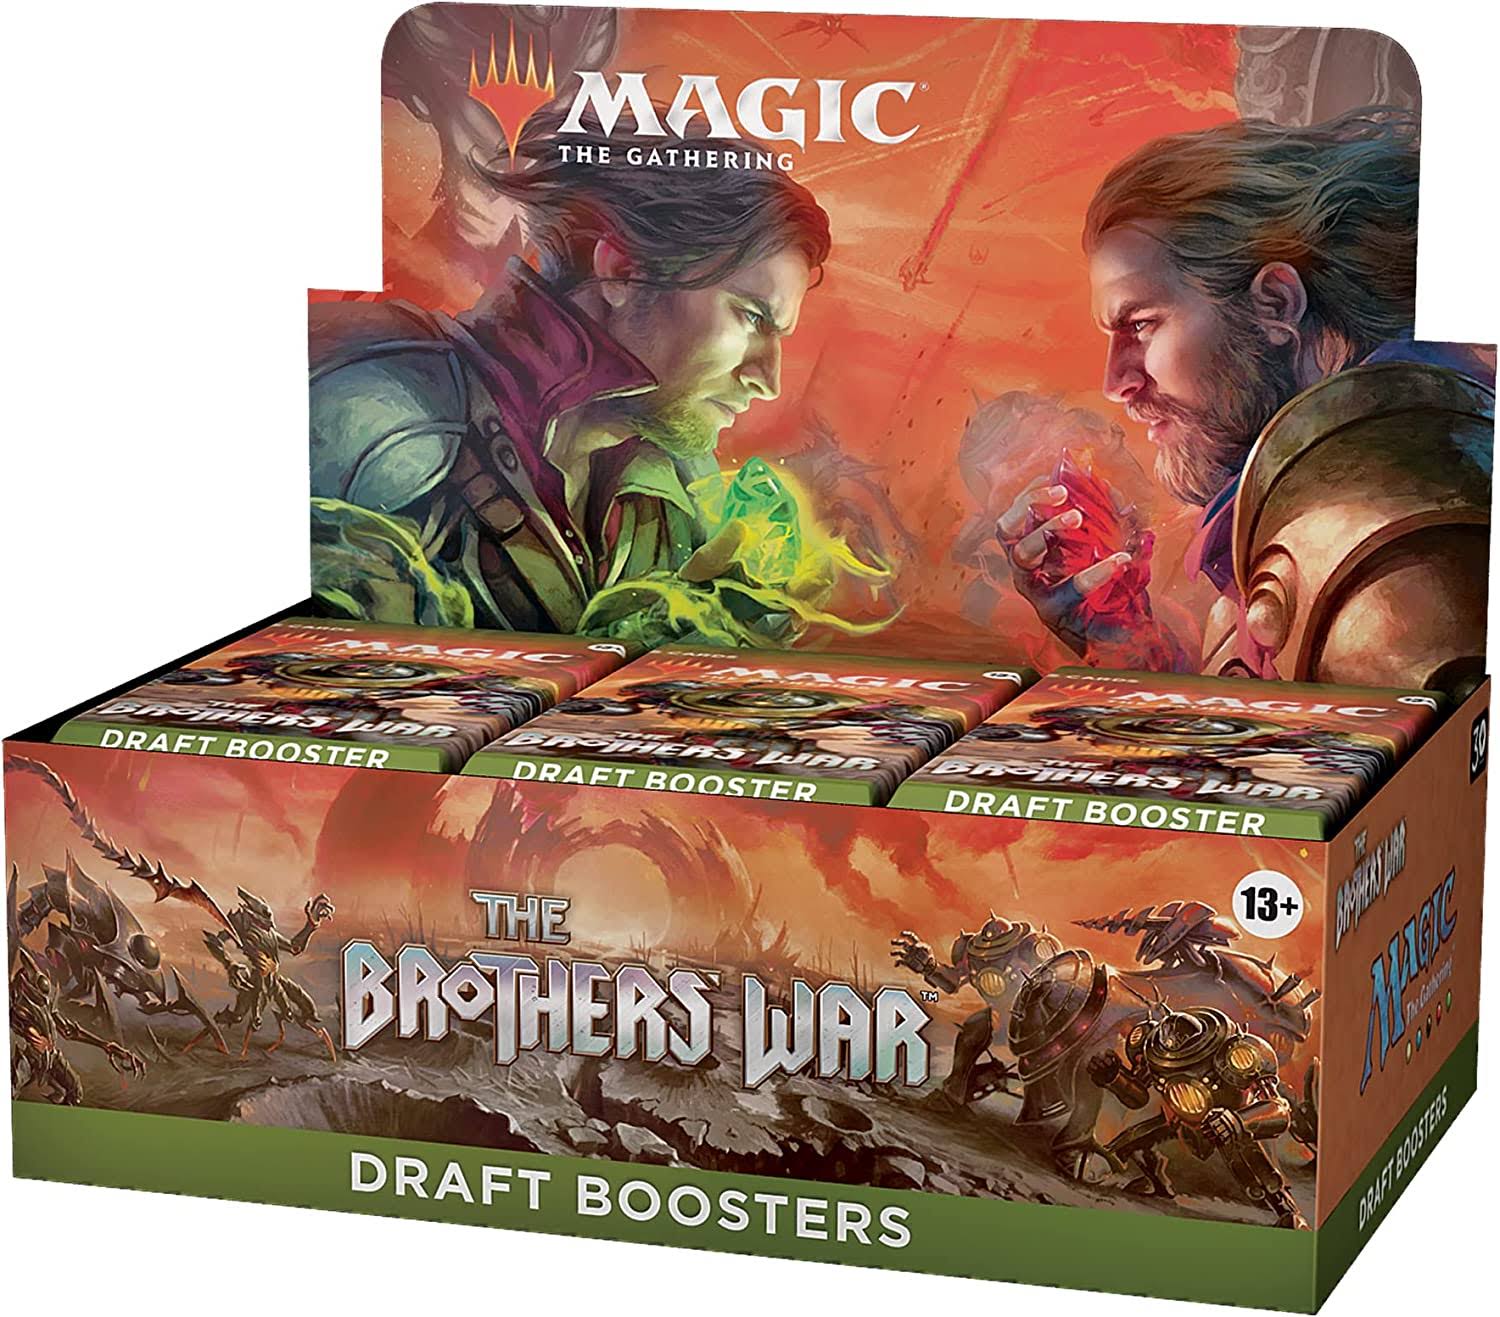 Magic: The Gathering - The Brothers' War Draft Booster Box